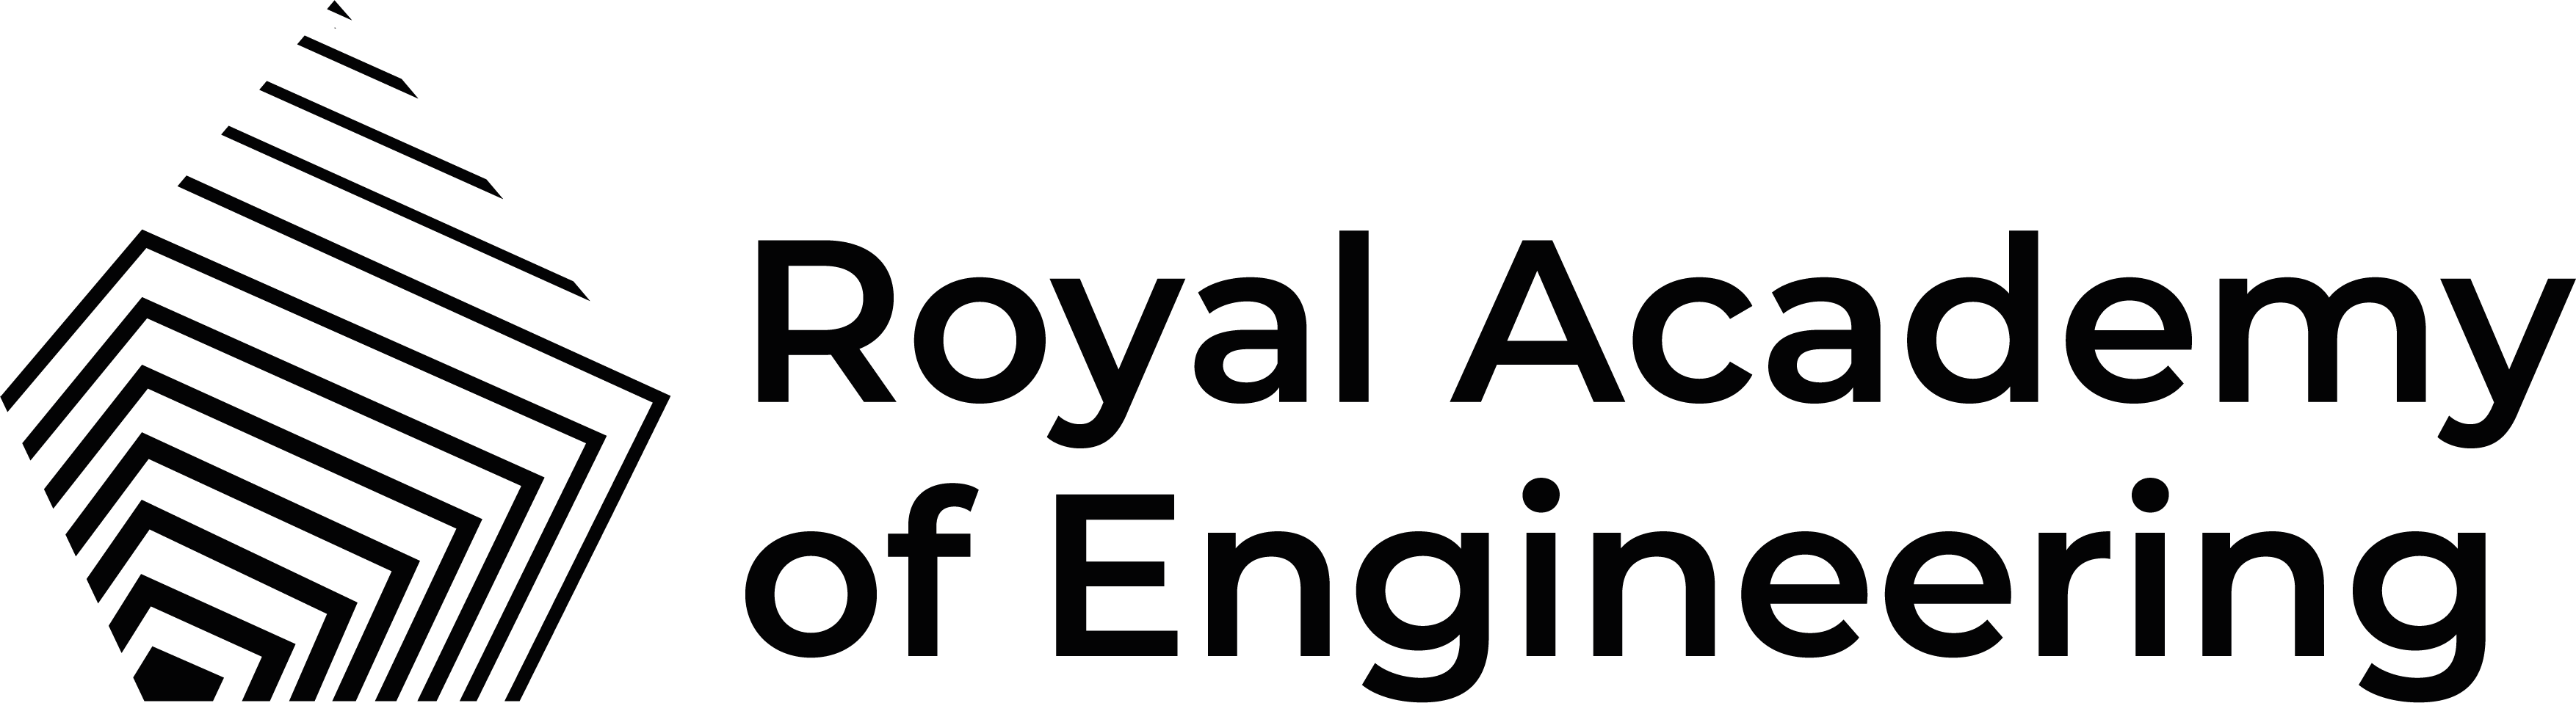 Black logo for Royal Academy of Engineering